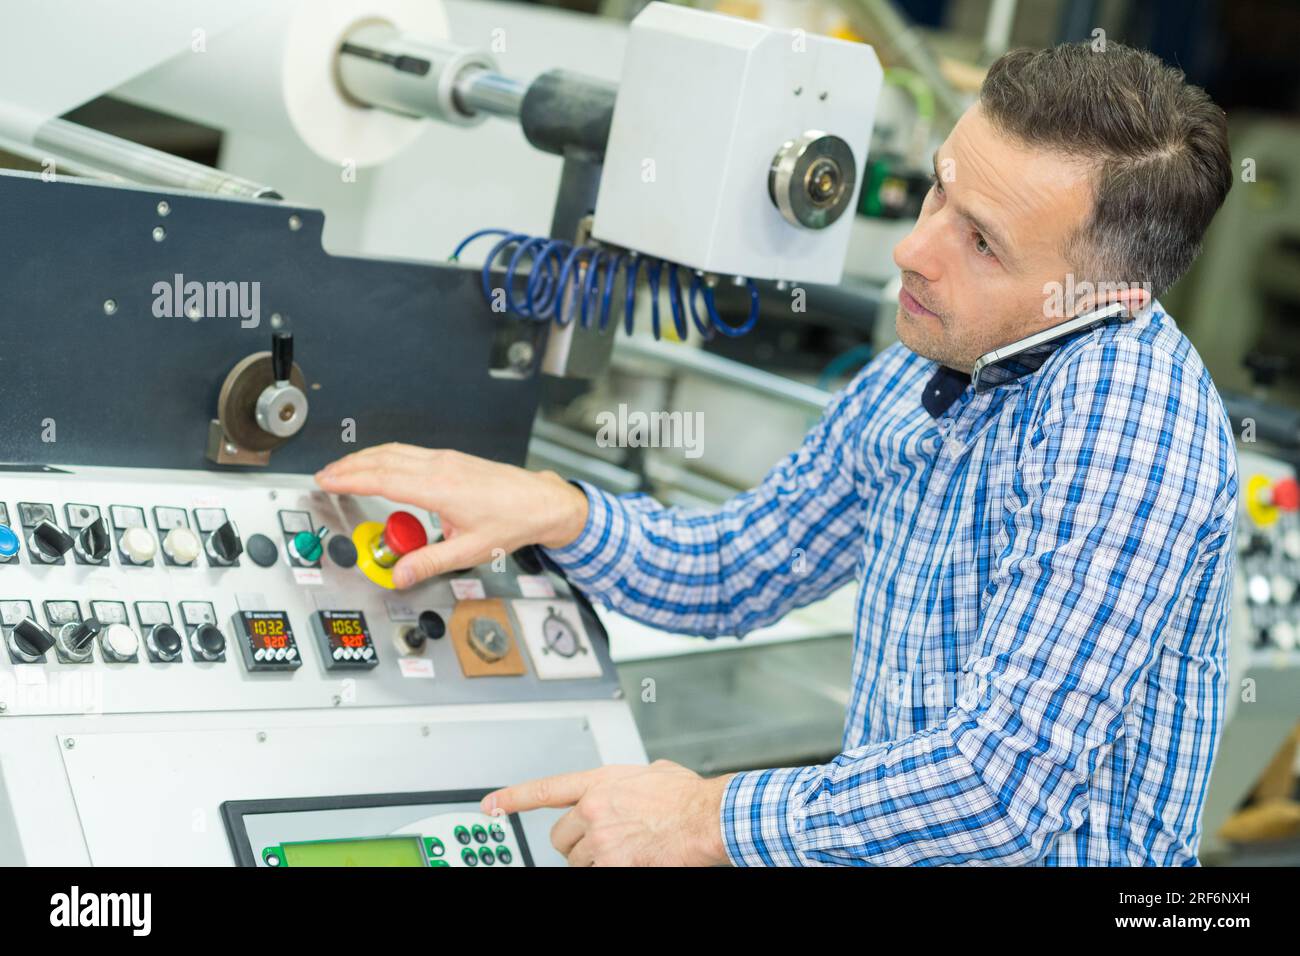 engineer operating equipment in a small factory Stock Photo